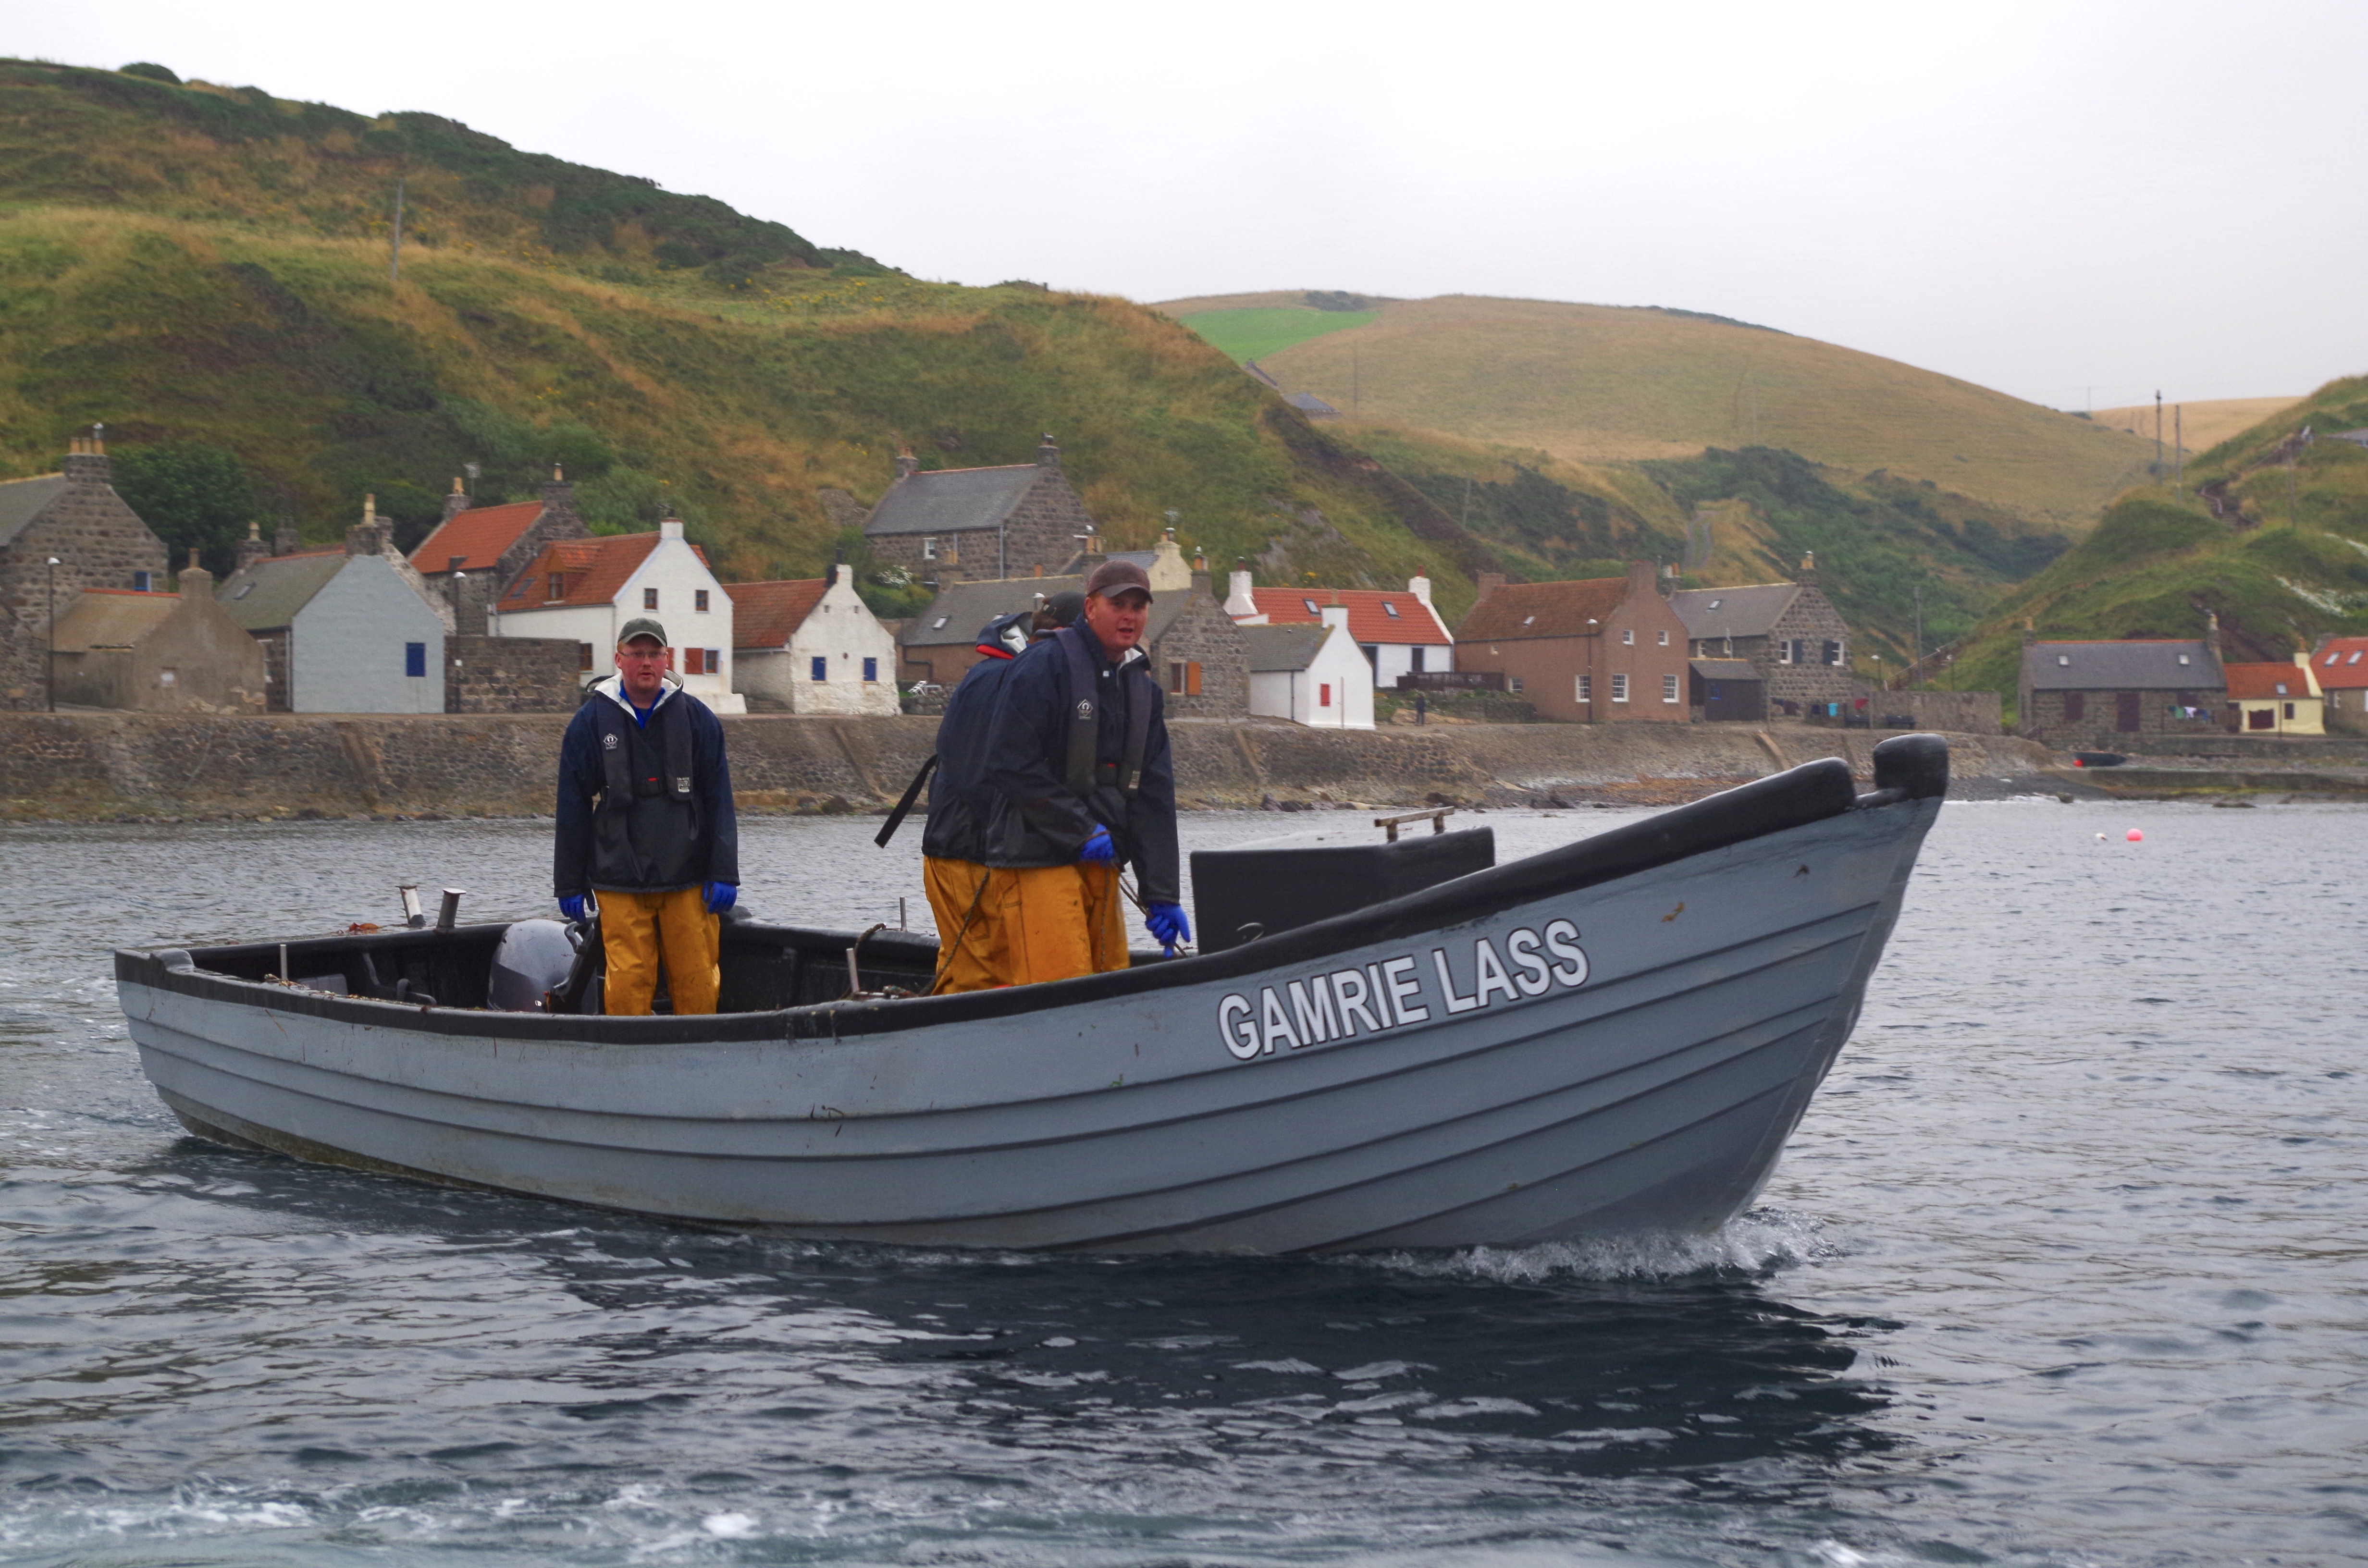 Brothers Kevin Pullar (left) and John Pullar (right) on Gamrie Lass.